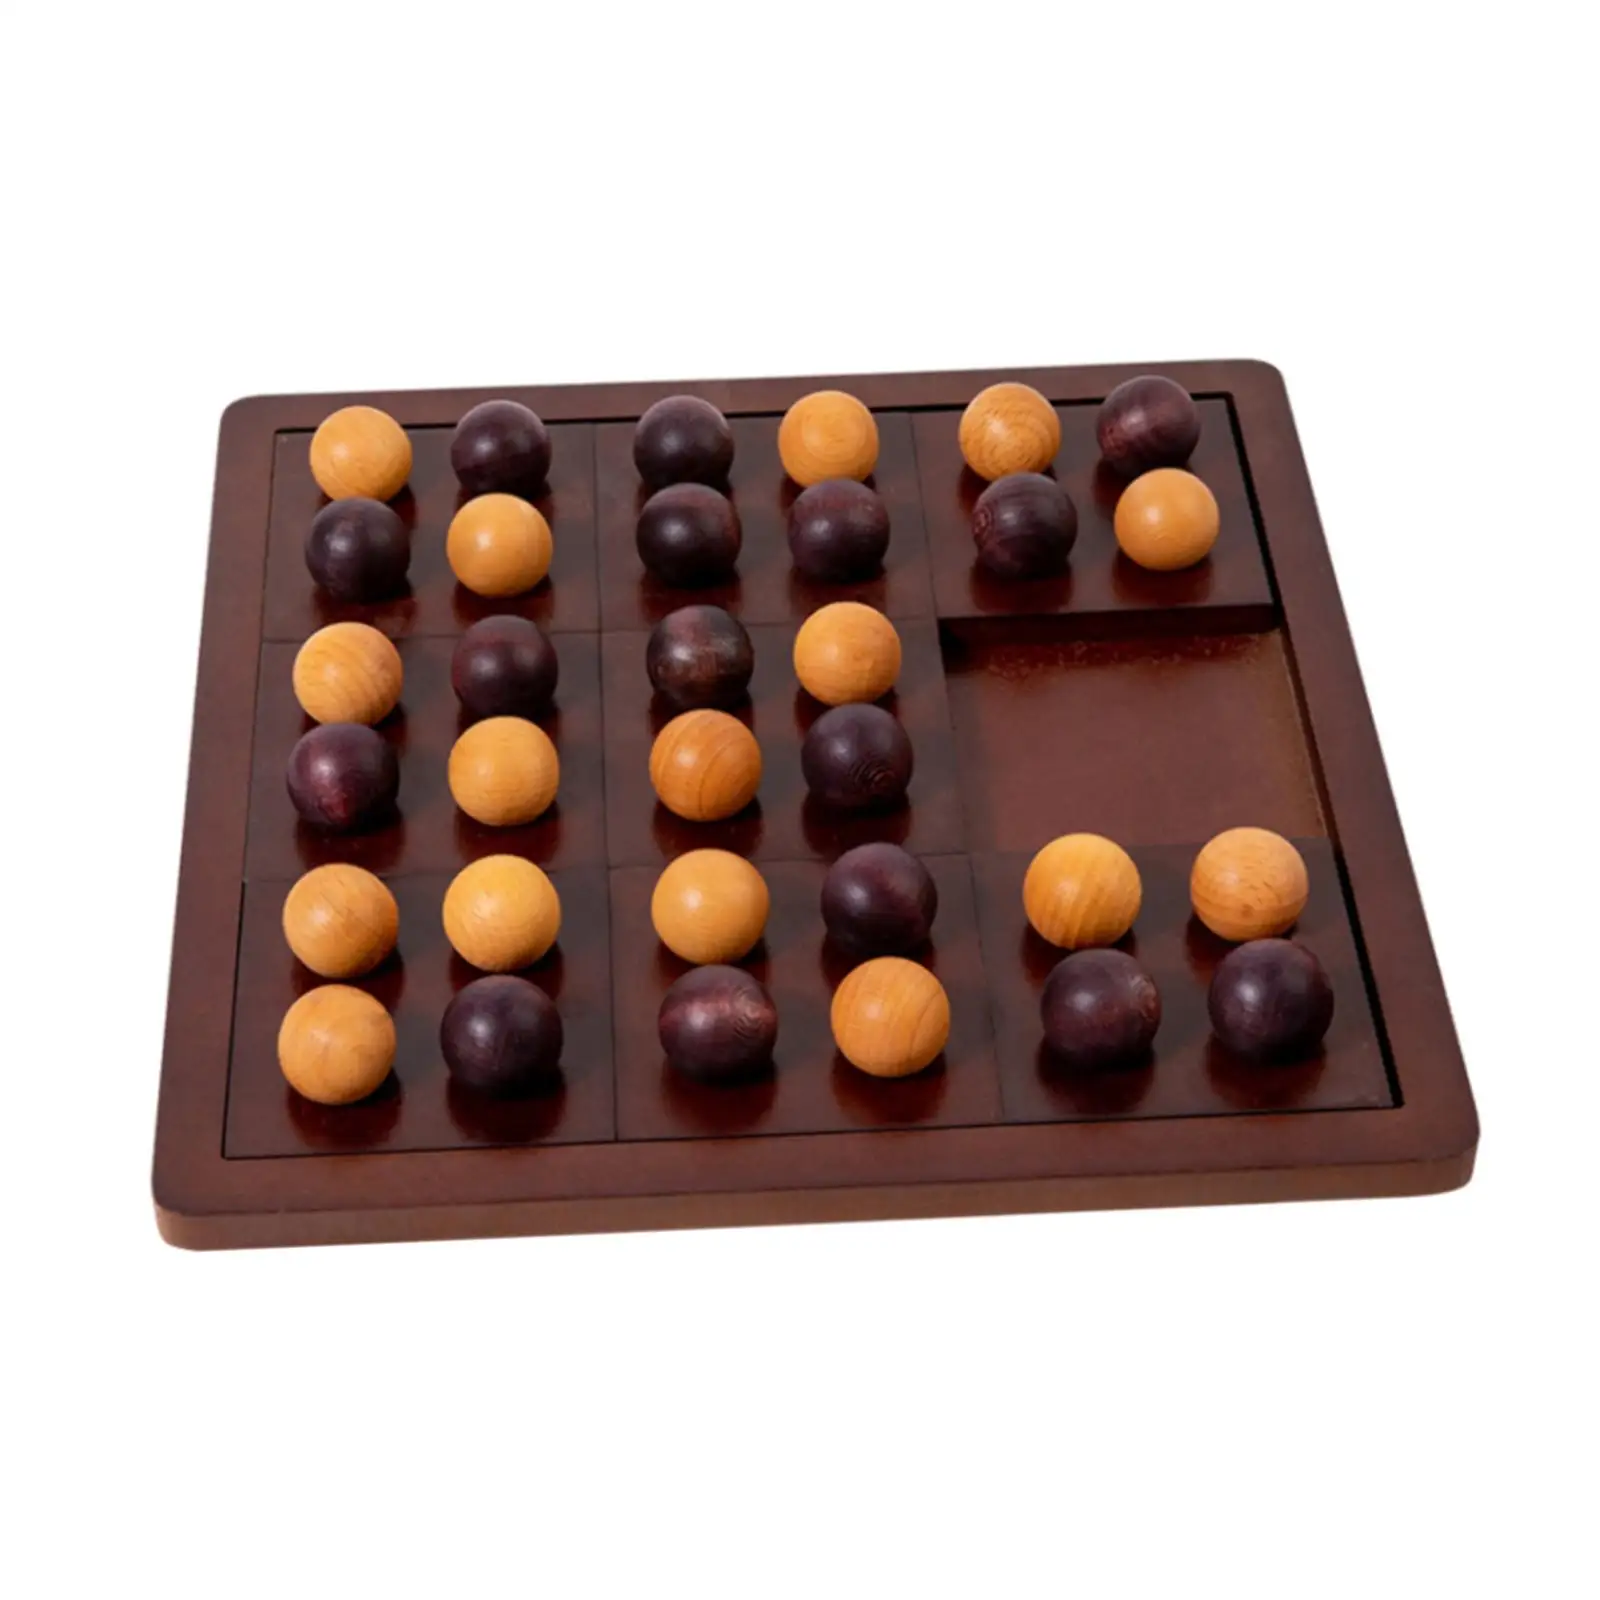 Wood Tic TAC Toe Game Logical Thinking Training Dual Challenge Chess Toy for Children Adults Outdoor Indoor Travel Plane Trips